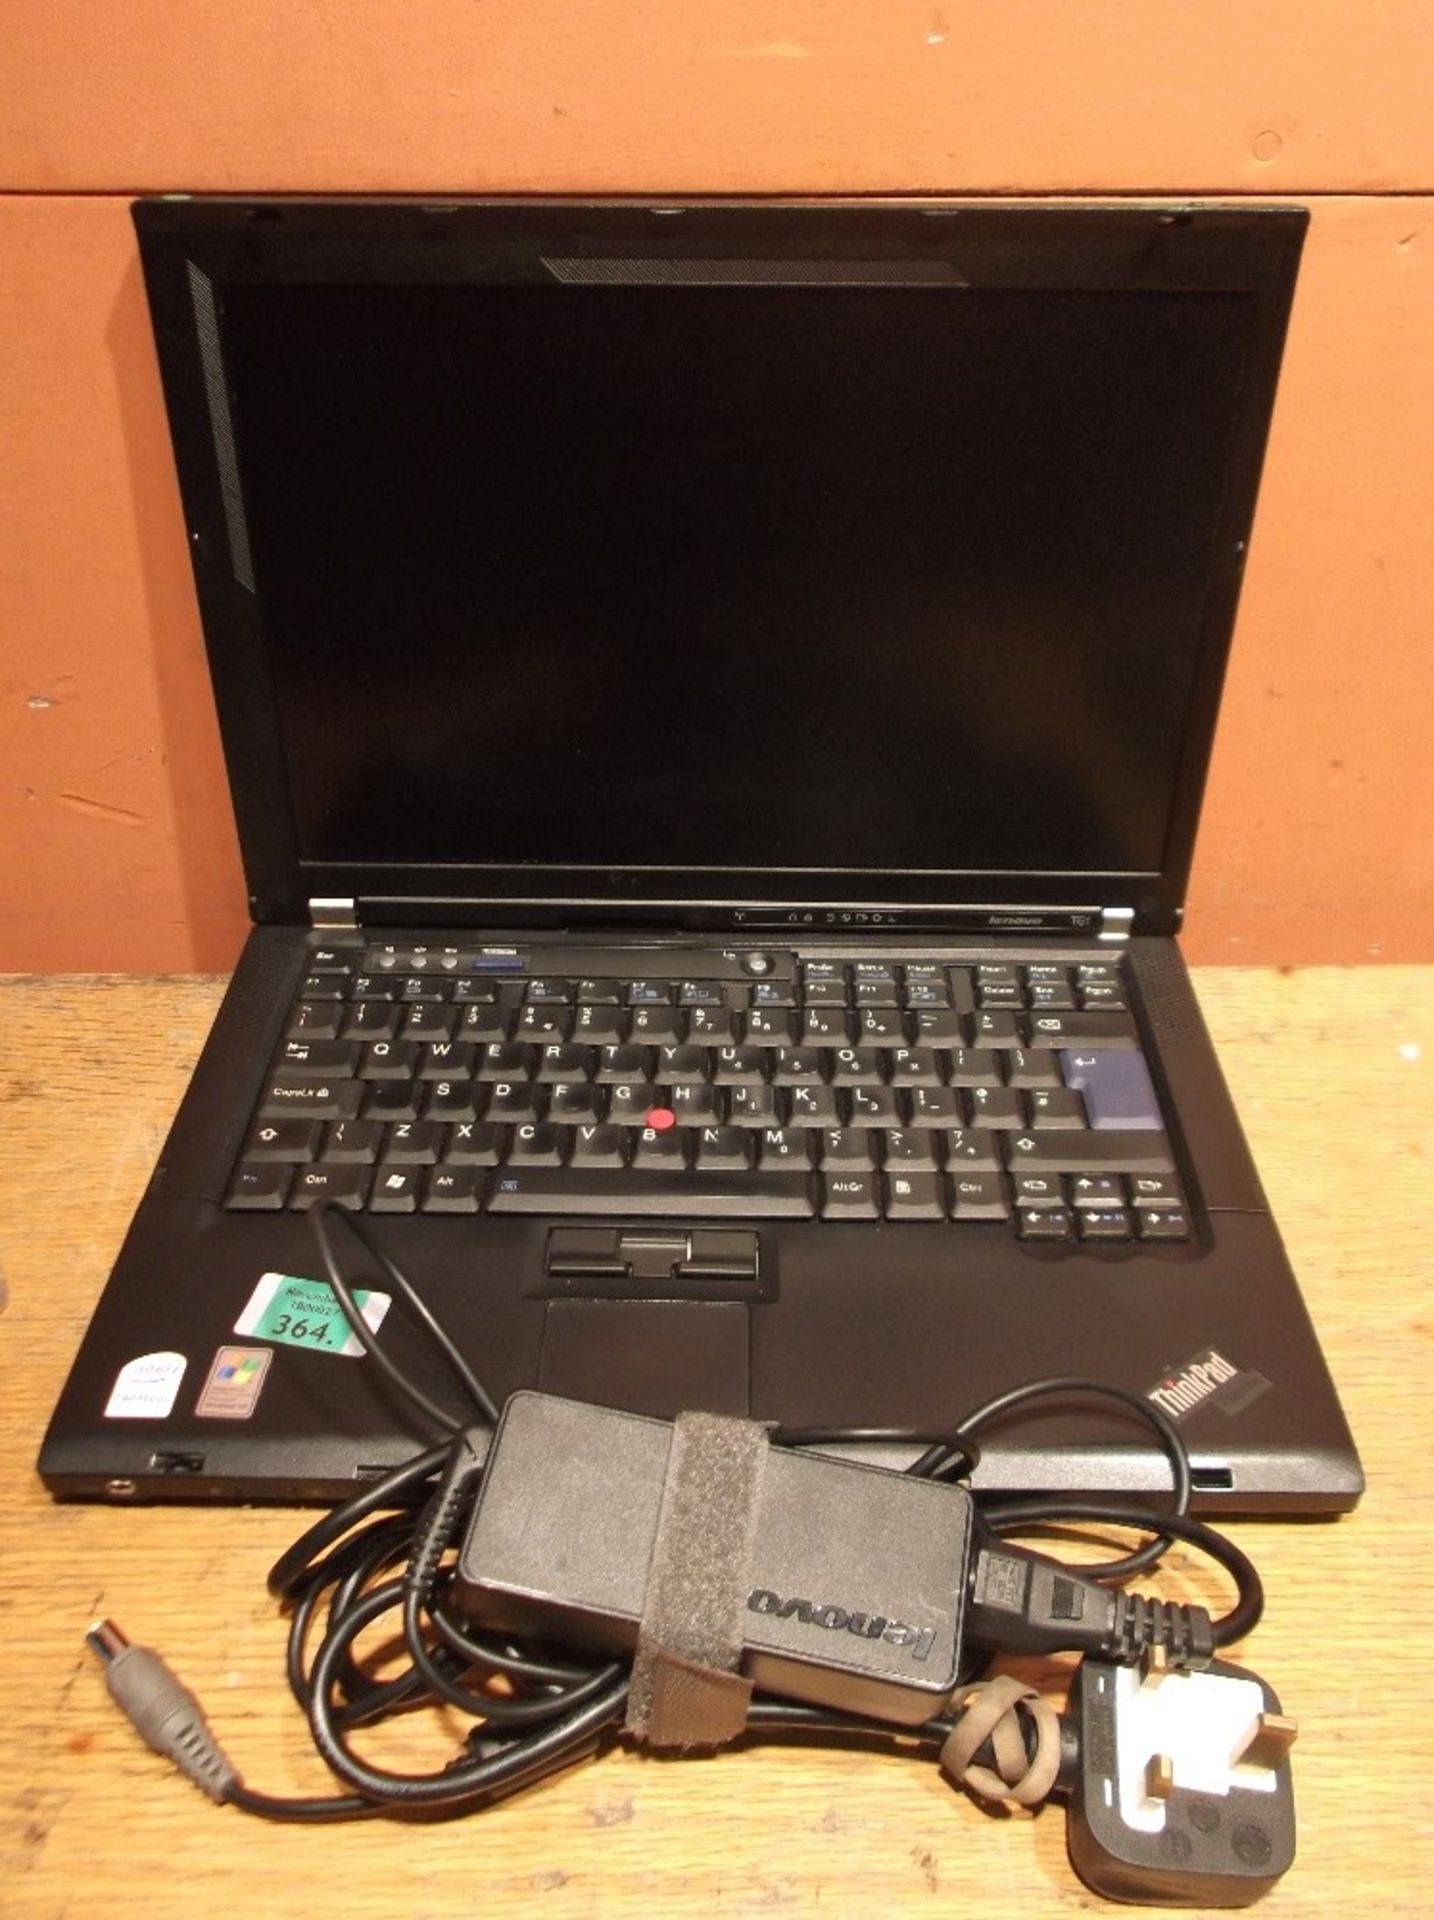 LENOVO T61 Laptop - Intel Core 2 Duo @ 1.8Ghz - 2GB Ram - 80GB Hdd - DVD-Rom - Charger - Extended